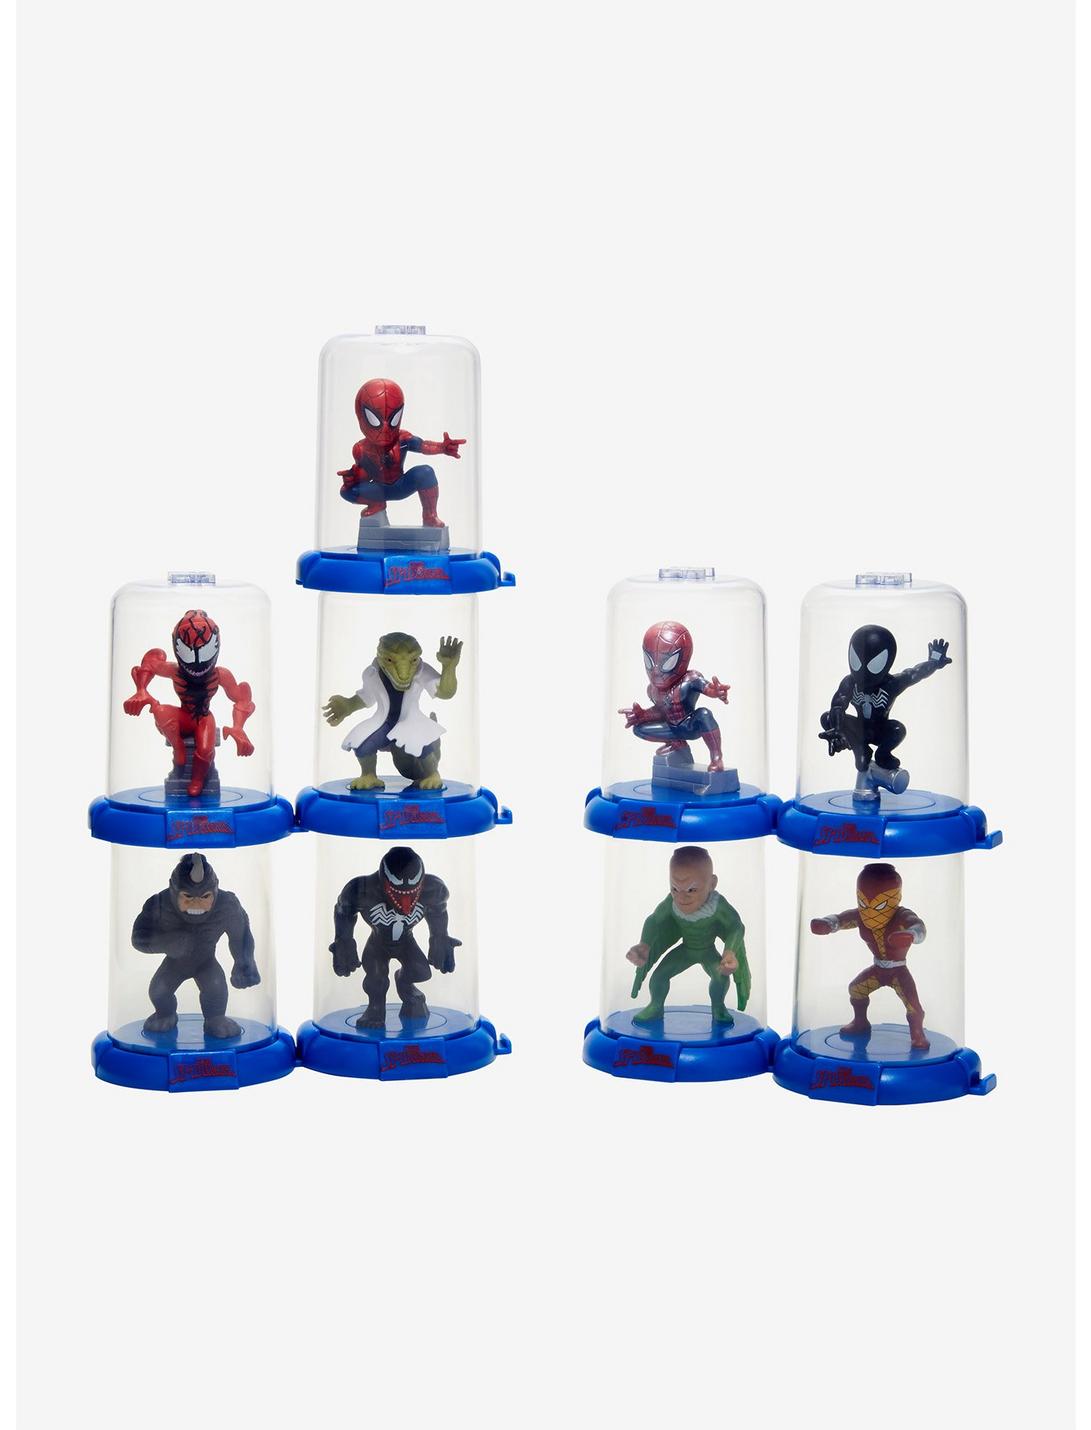 Carnage MARVEL DOMEZ SPIDER-MAN BAG COLLECTIBLE MINI FIGURES SERIES 1 NEW 